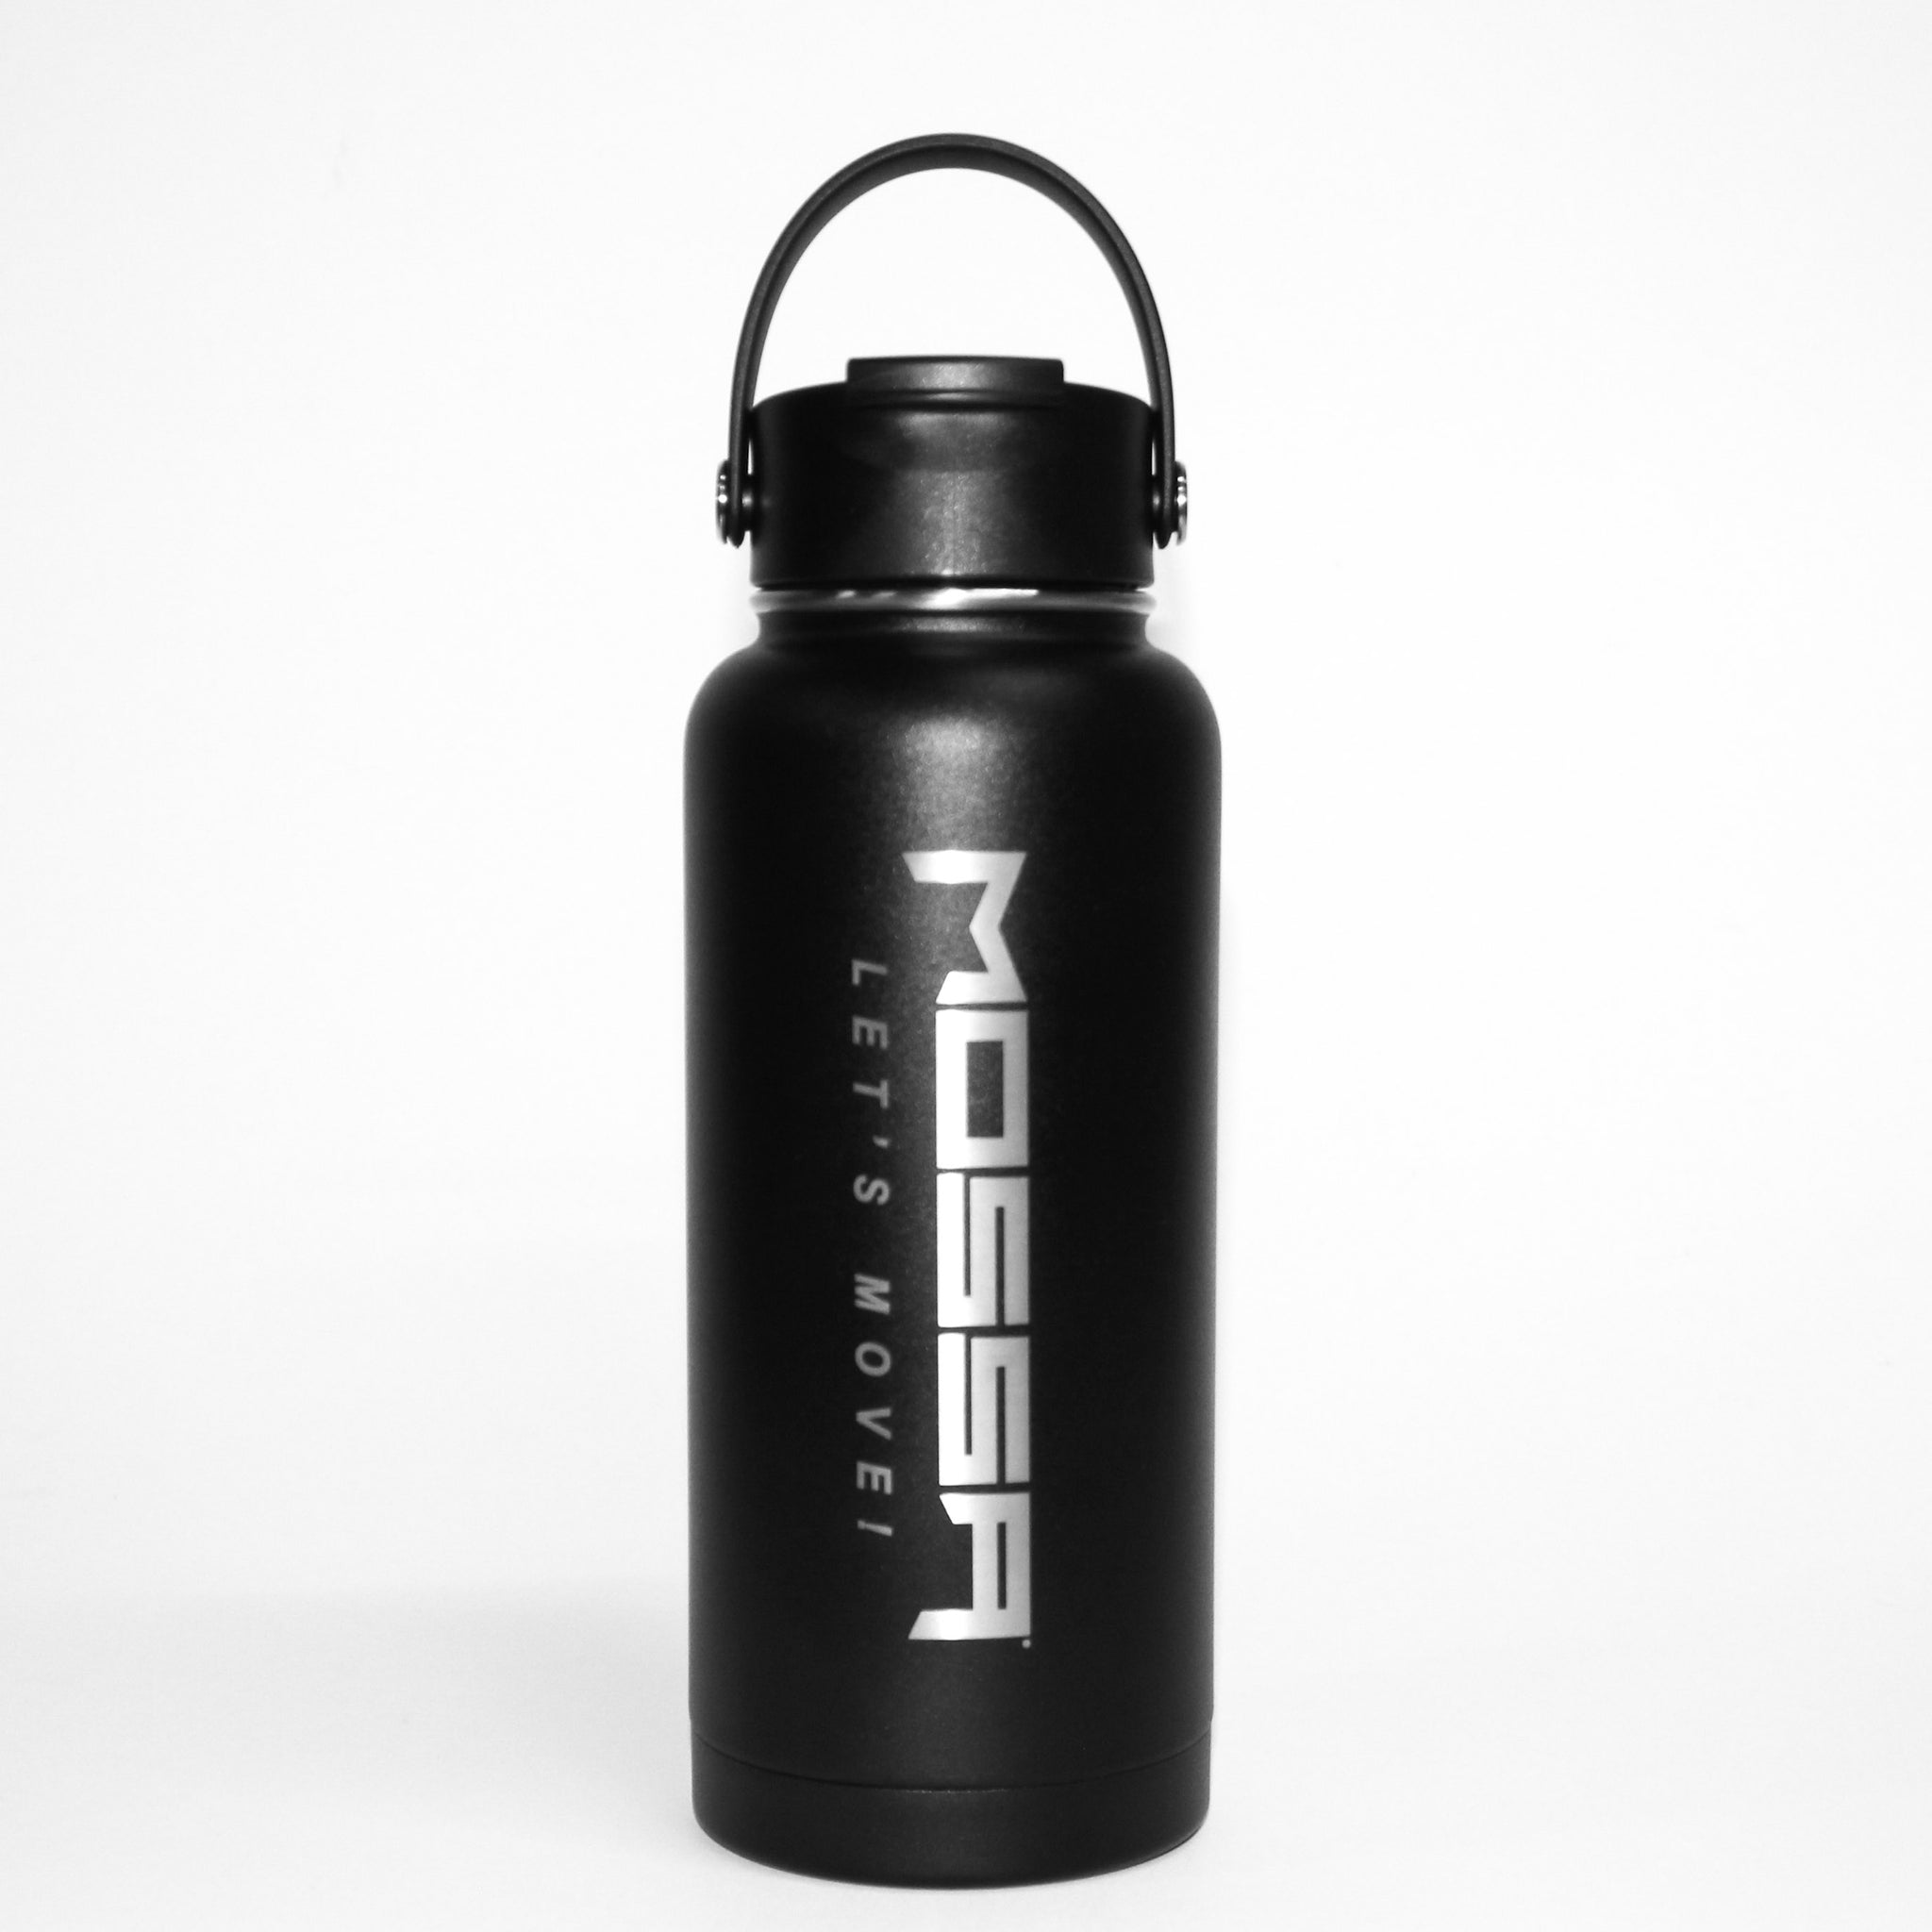 MOSSA LET'S MOVE! RTIC 32 oz. Water Bottle (Charcoal)